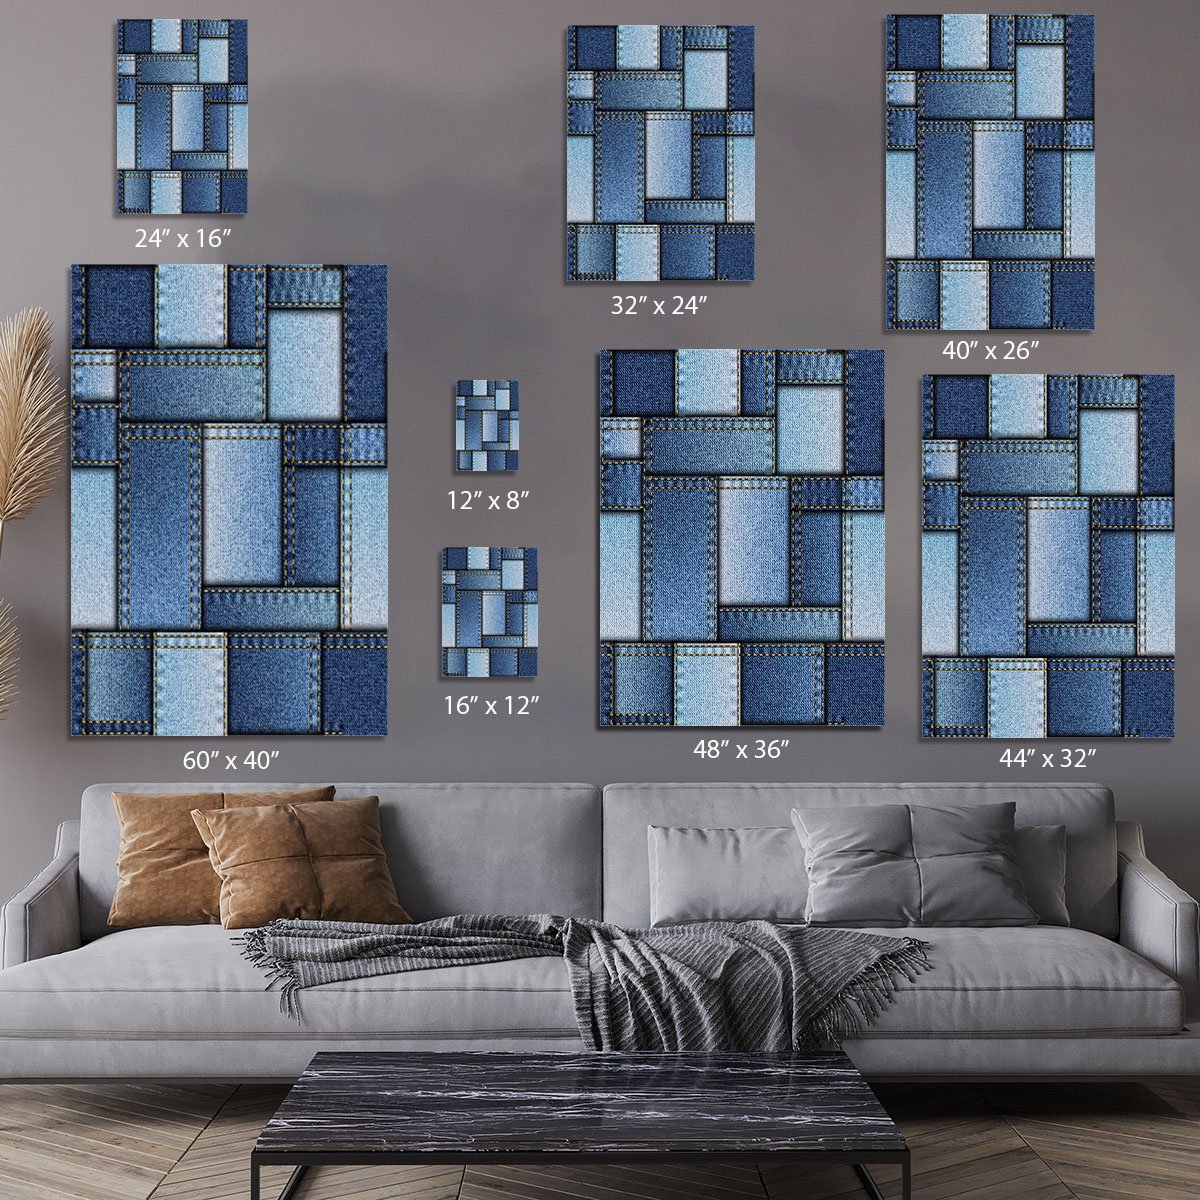 Patchwork of denim fabric Canvas Print or Poster